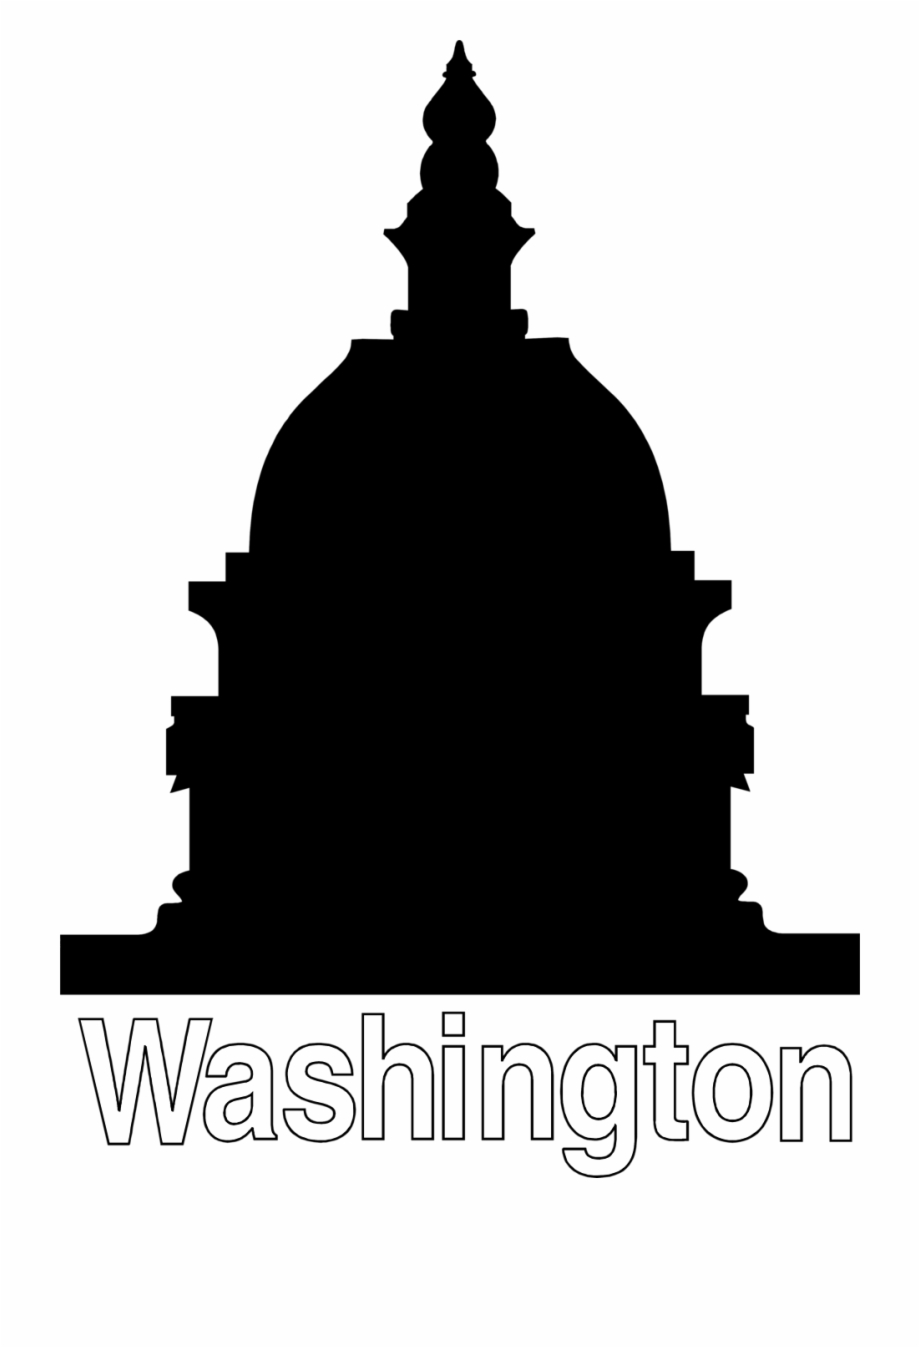 Illustrated Silhouette Of The Us Capitol Building In